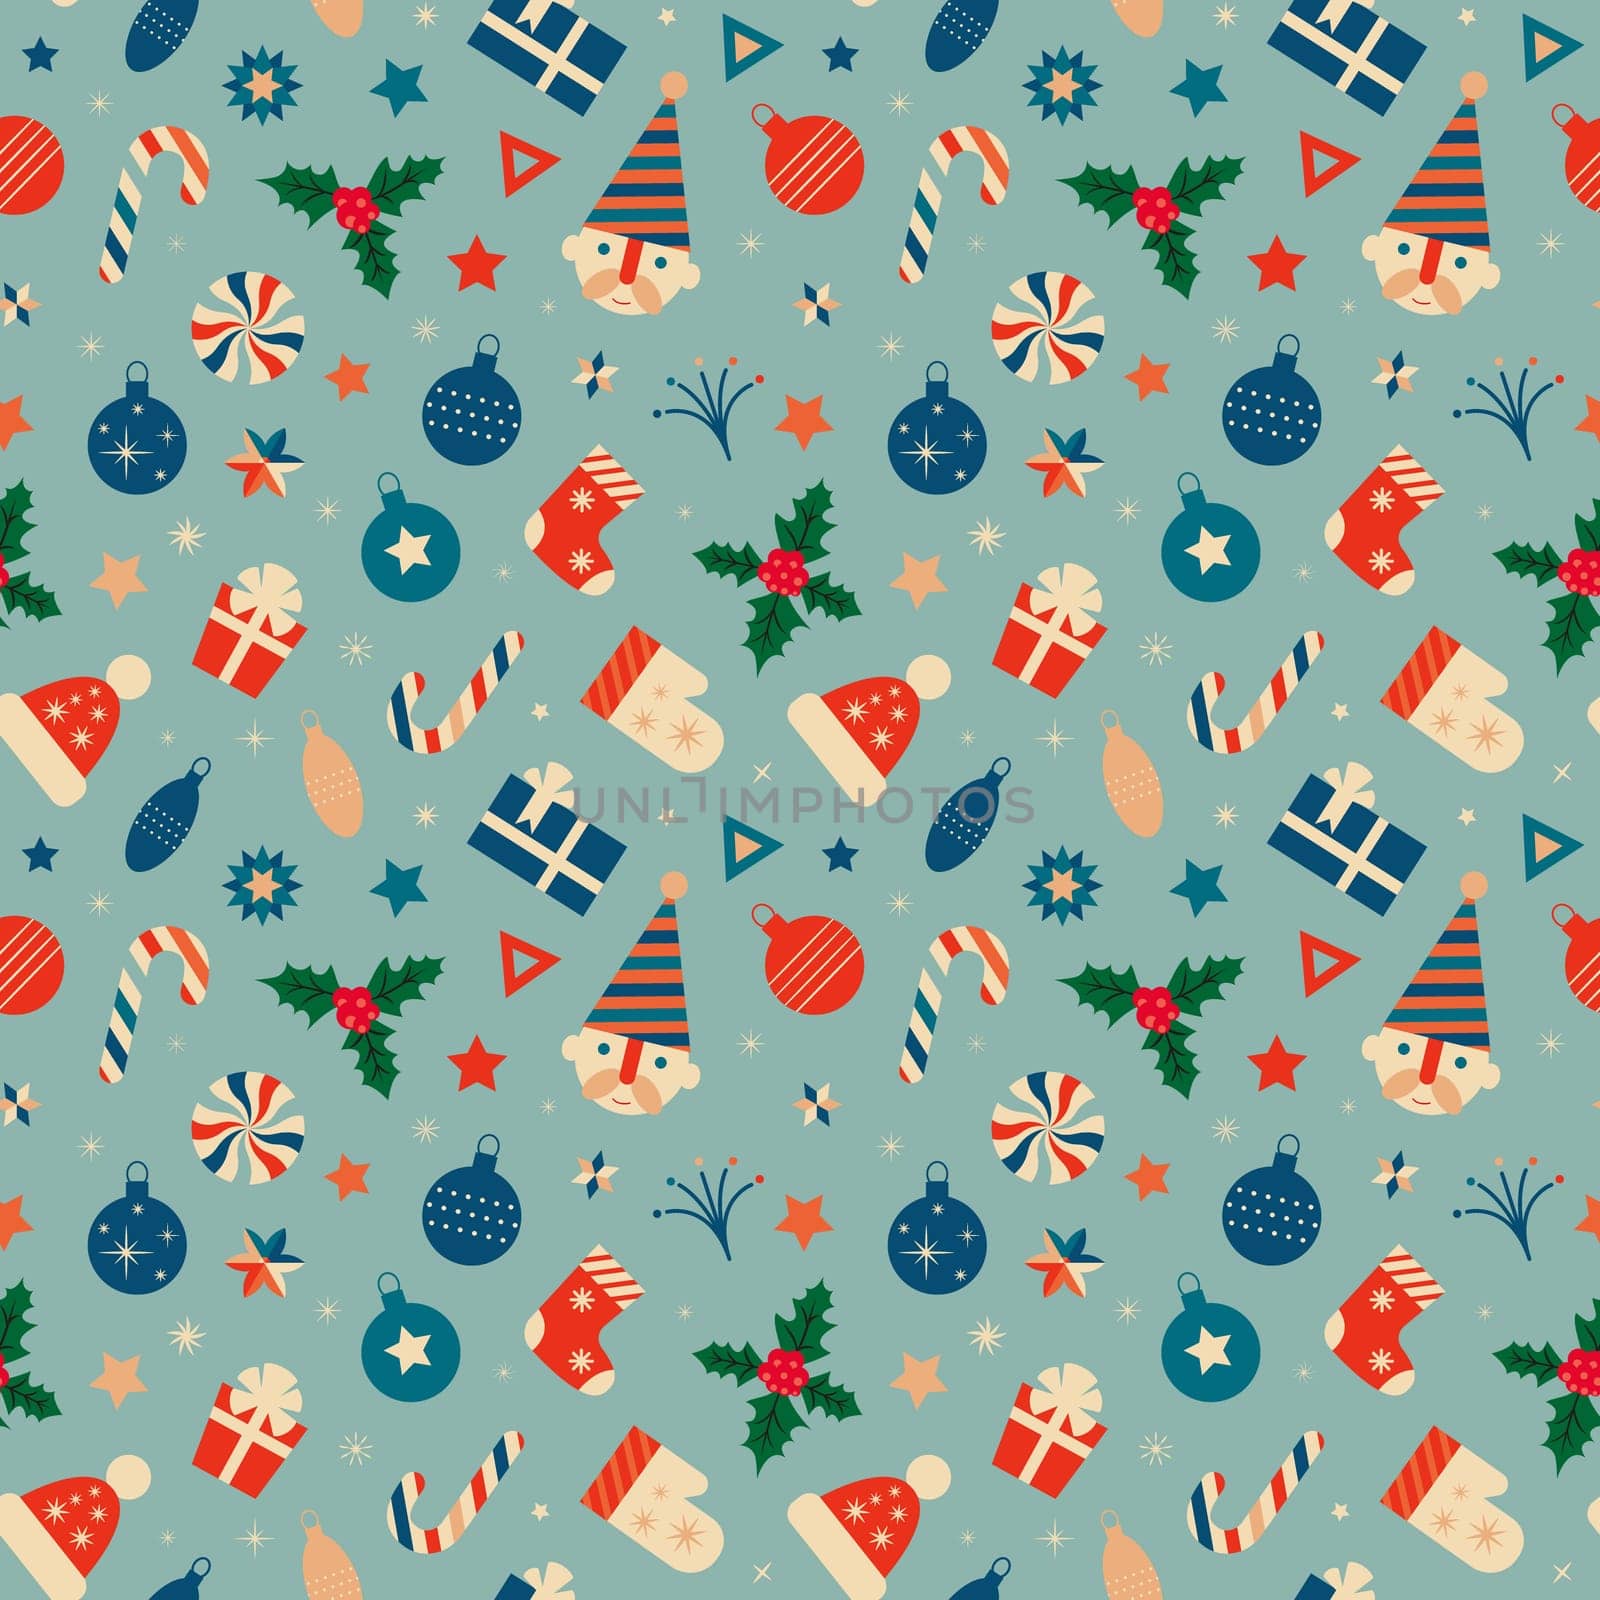 Retro Christmas seamless pattern with Christmas symbols gifts, santa claus, hats, mittens, snowflakes, sweets.